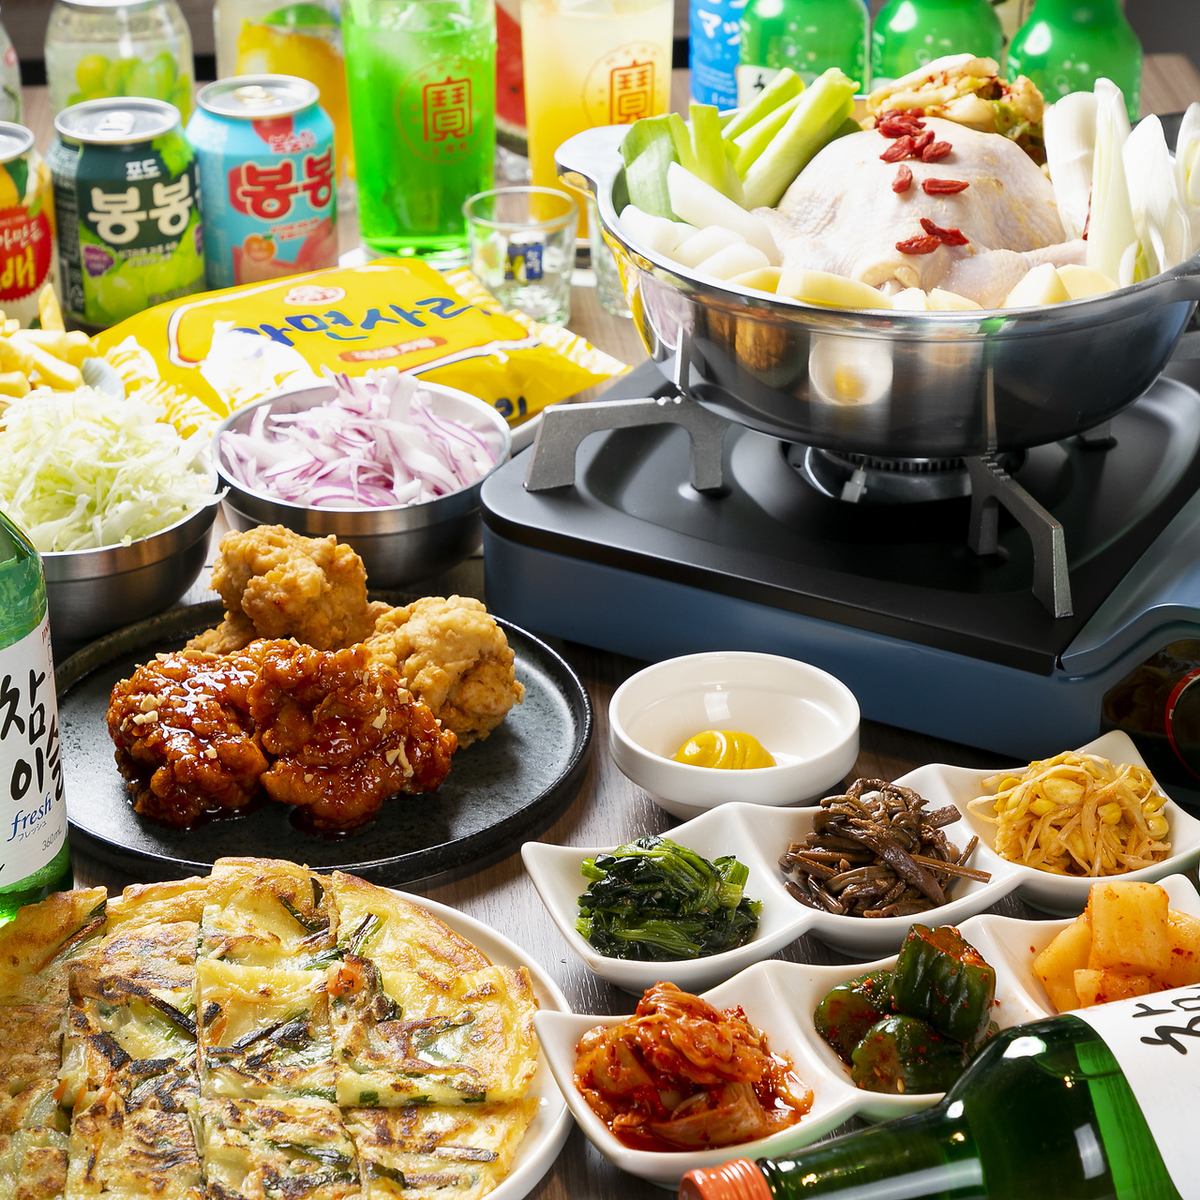 All-you-can-drink for 120 minutes★7 dishes in your choice of hotpot with a finishing touch: 3,980 yen → 3,500 yen